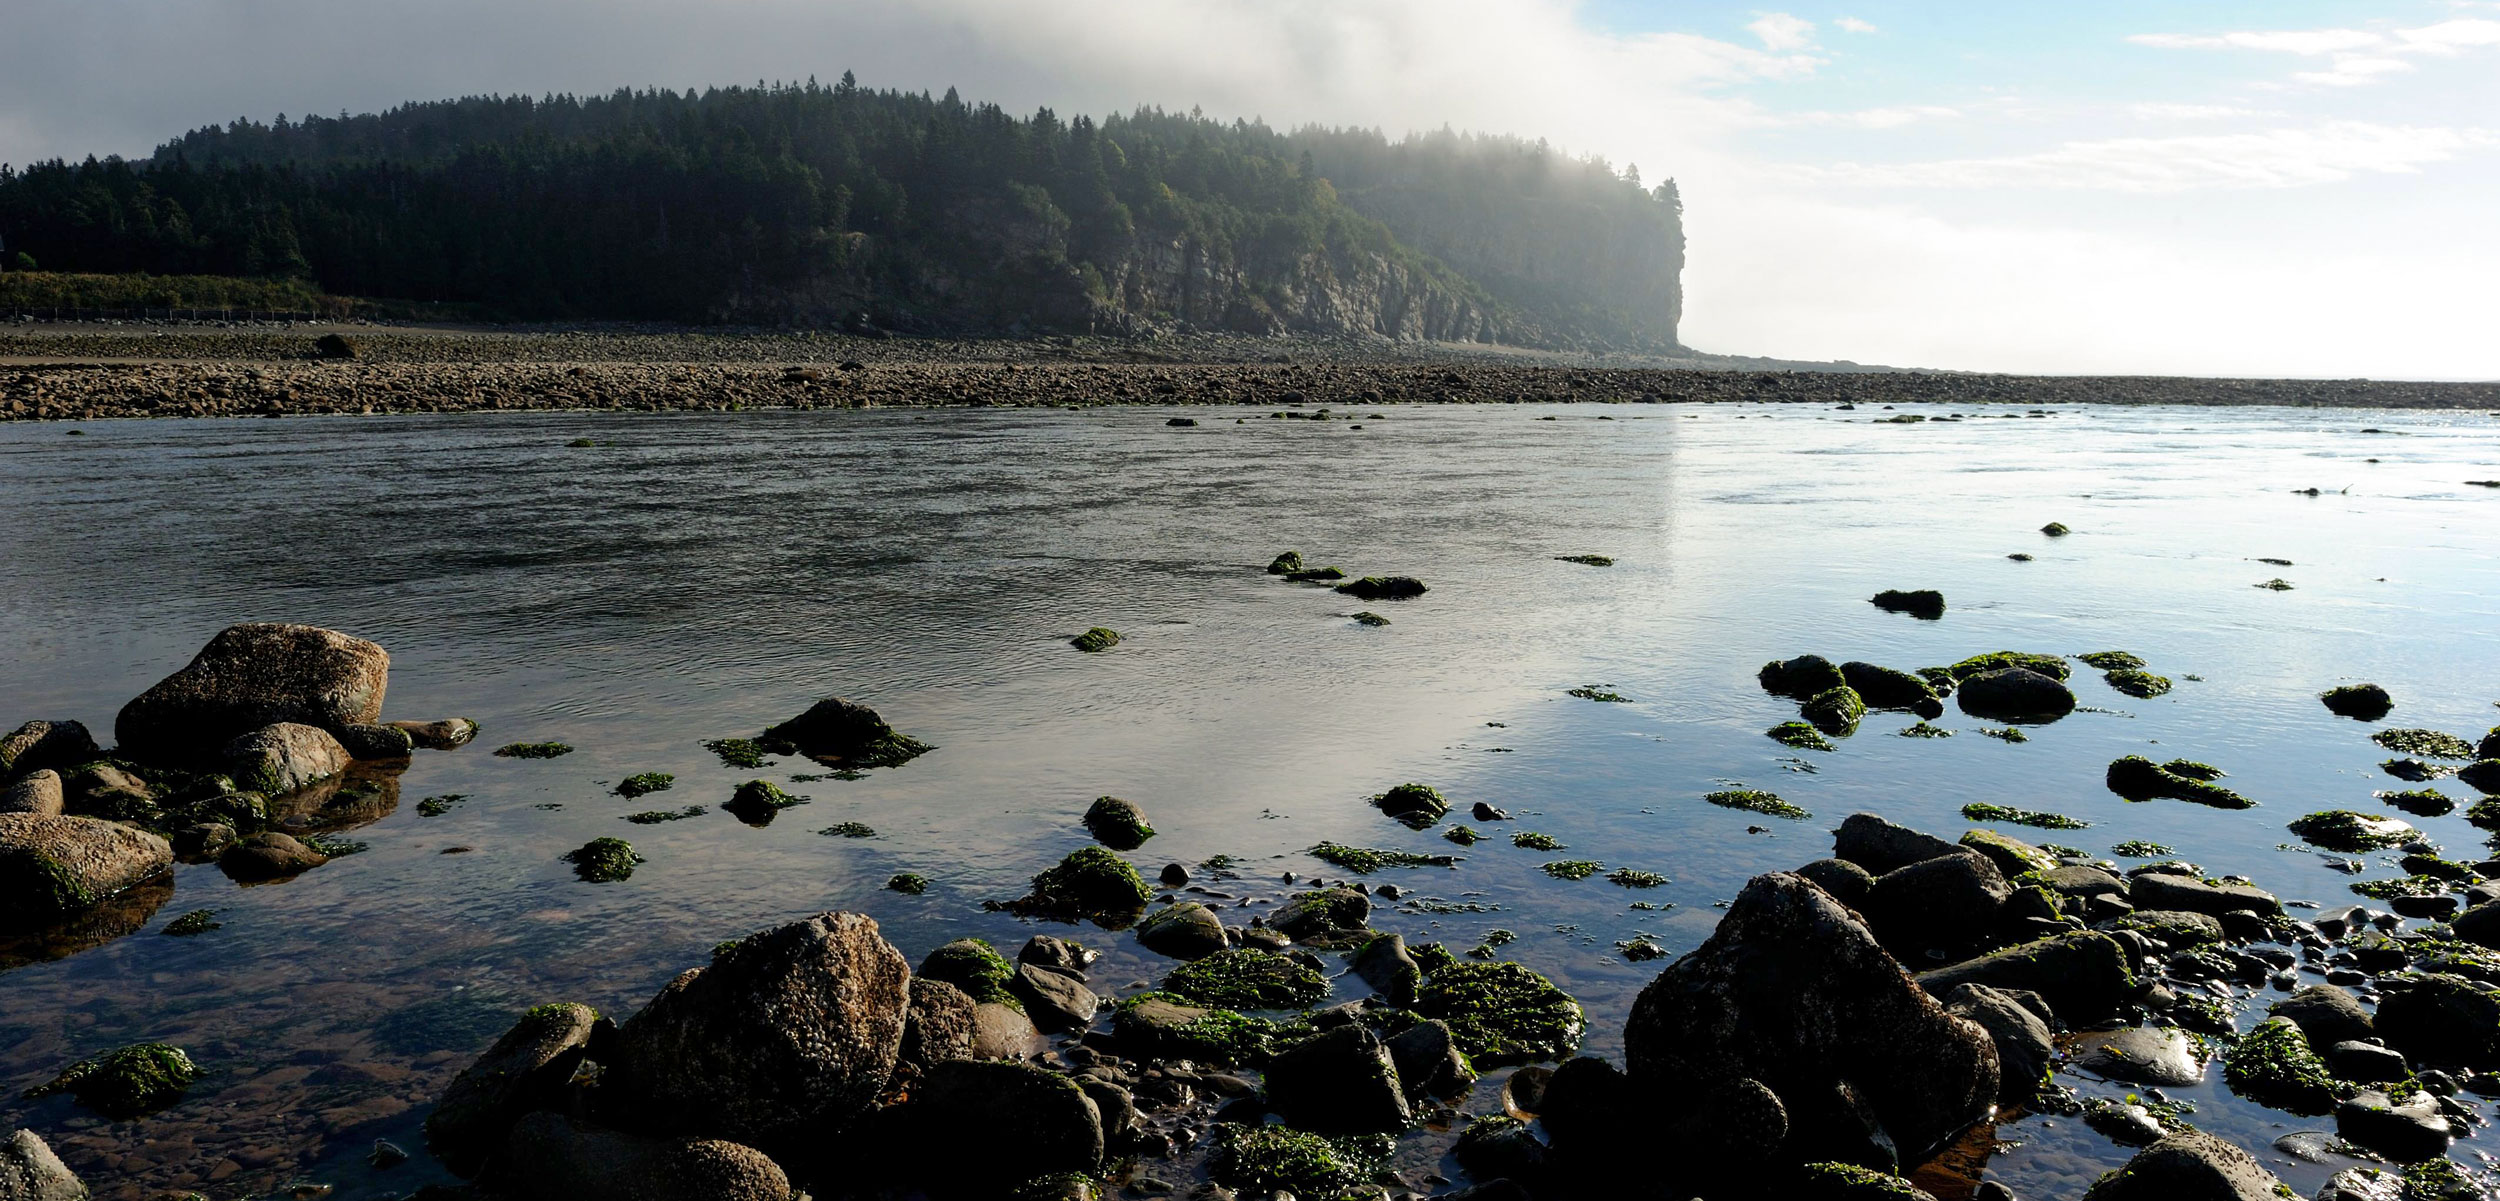 Upper Salmon river at outgoing tide and sunrise, Bay of Fundy